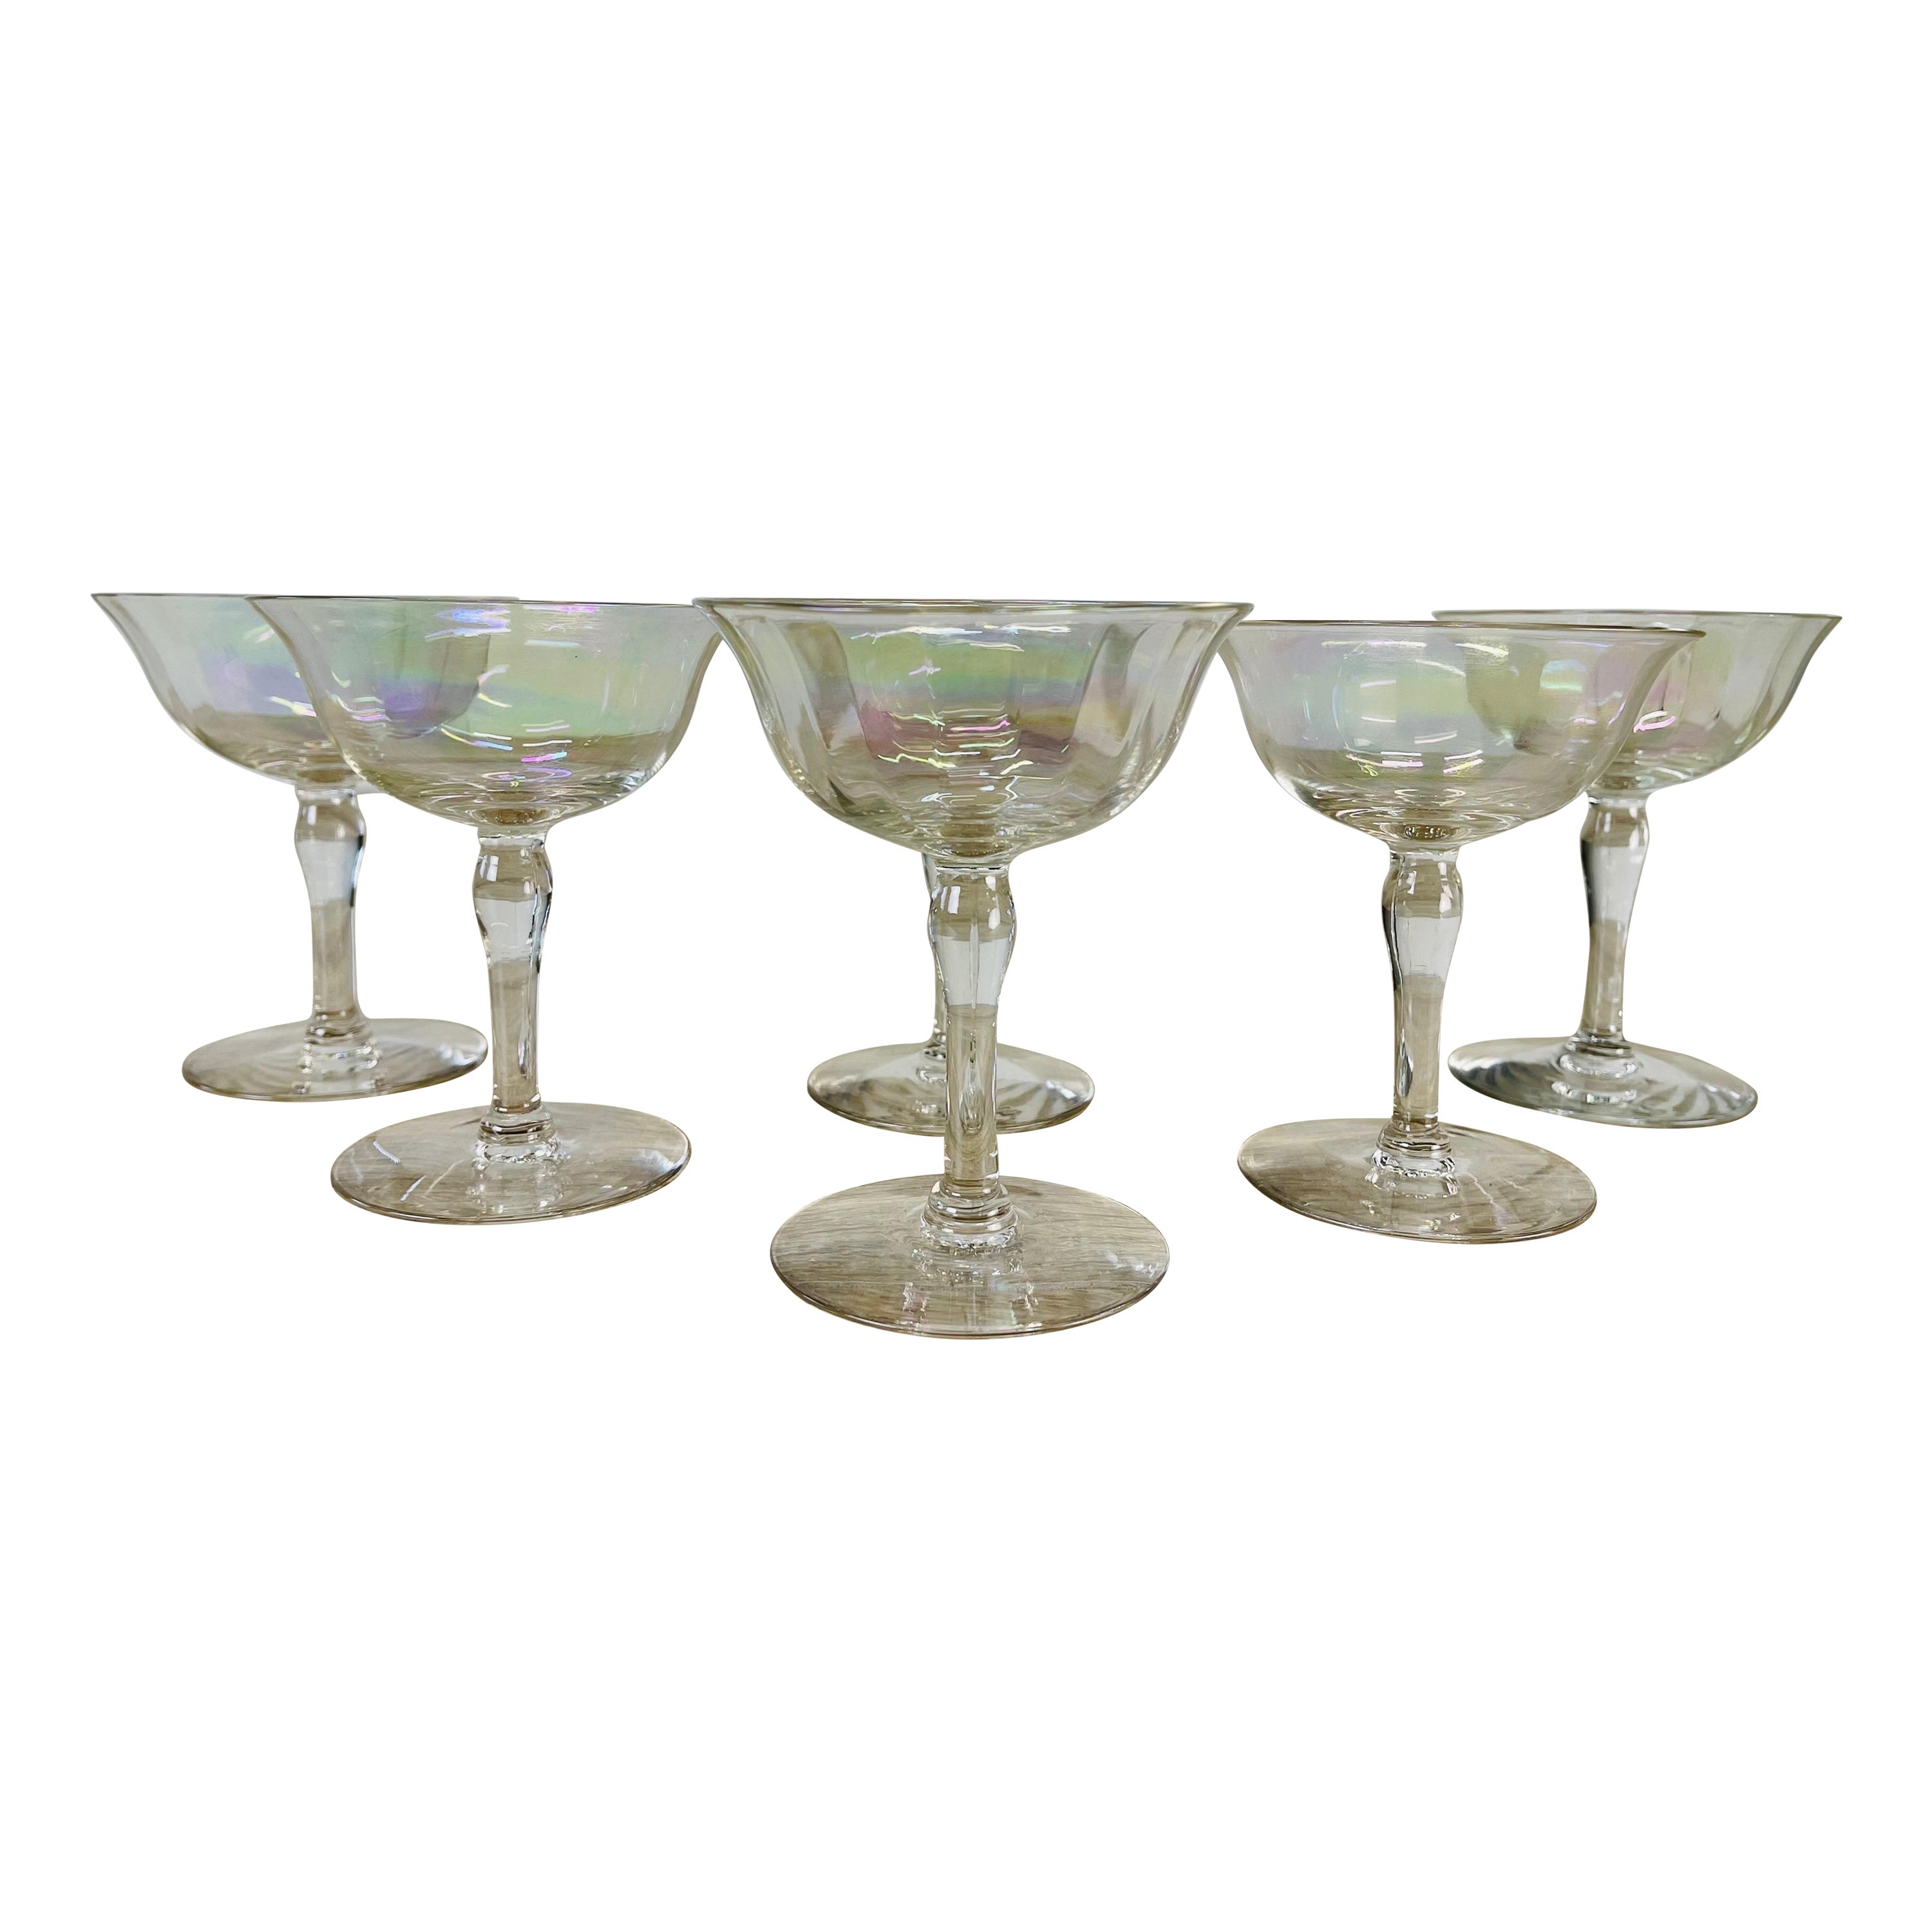 1960s Iridescent Glass Coupe Stems, Set of 6 For Sale